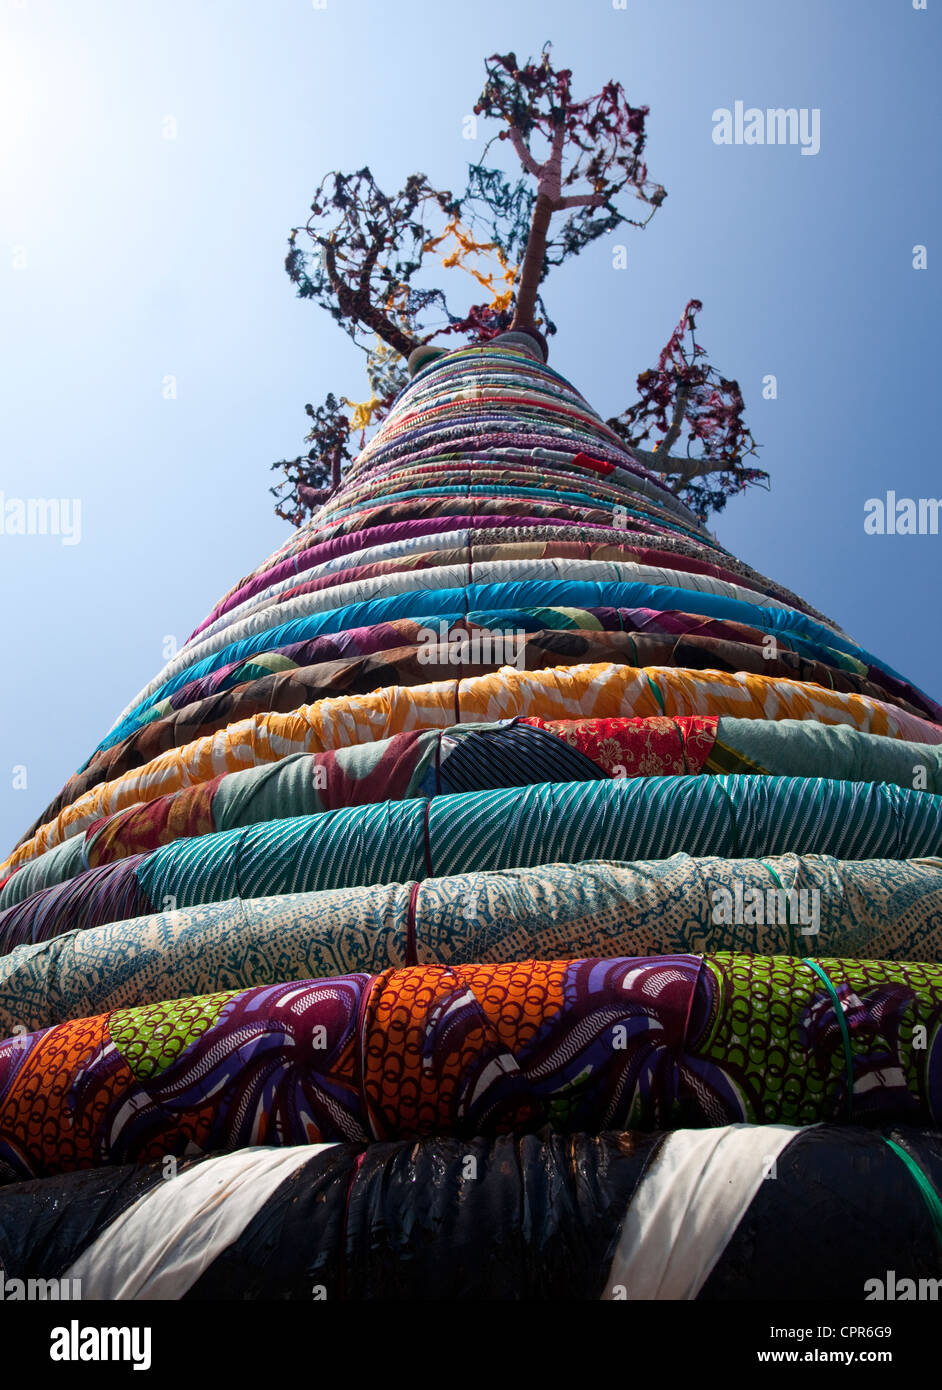 Under The Baobab Tree by Pirate Technics on South Bank, London for Festival of the World summer 2012 Stock Photo